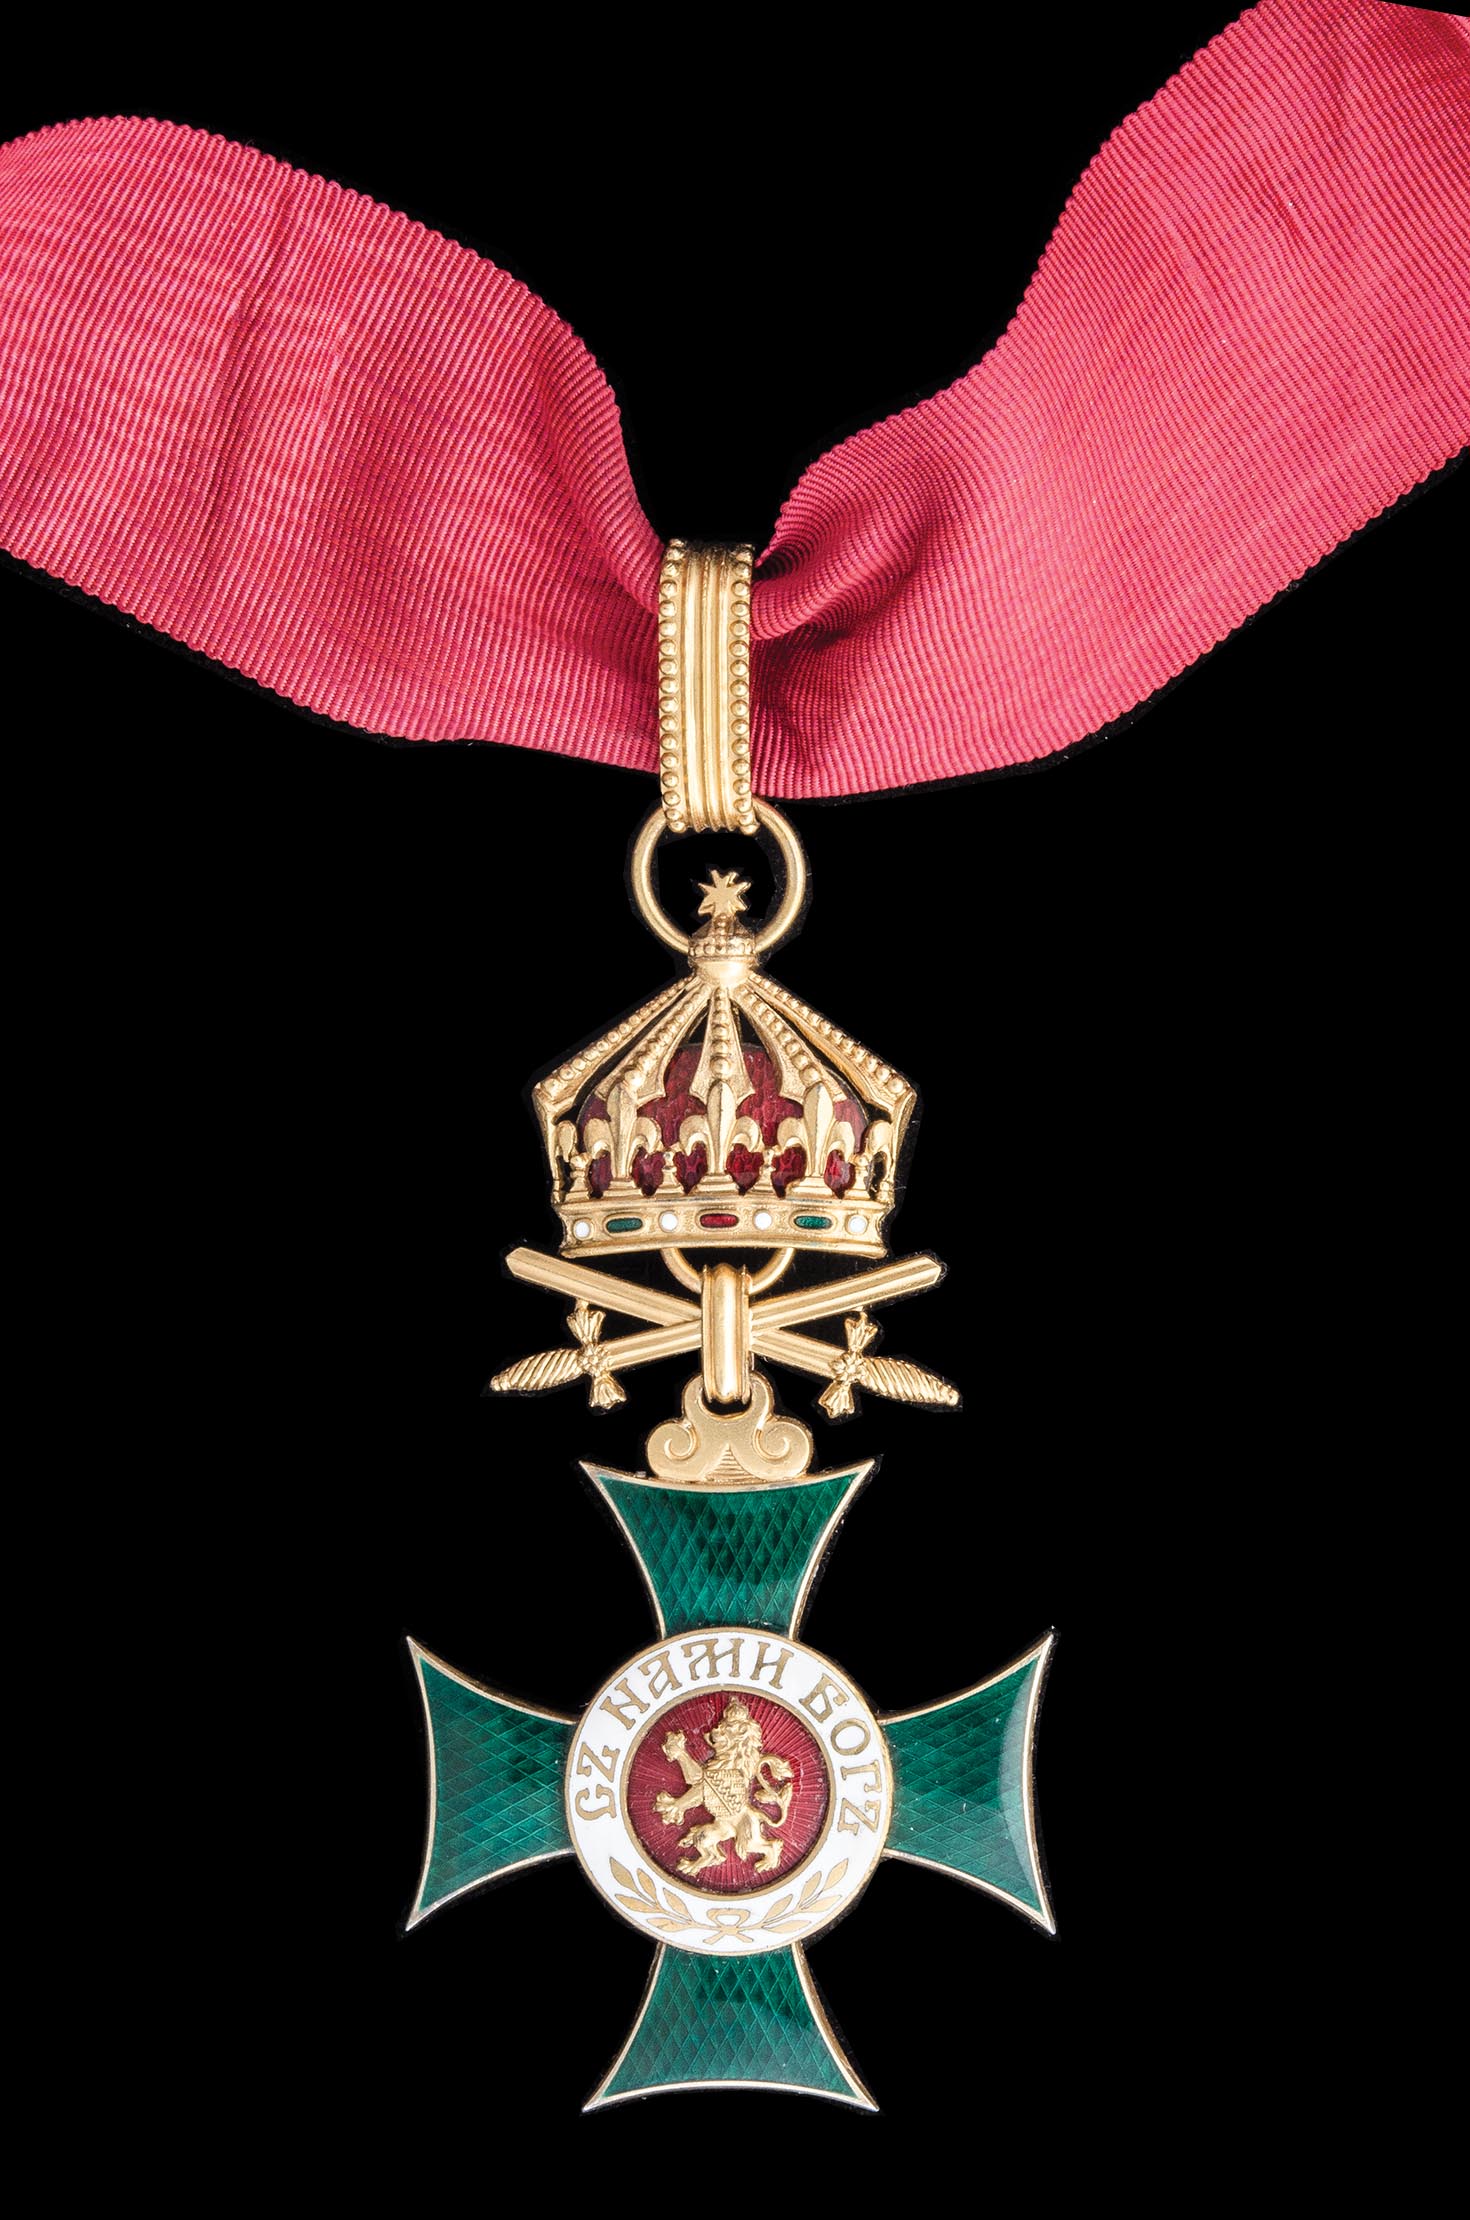 *Bulgaria, Order of St Alexander, Military Division, type 2 (1908-44), Third Class neck badge,